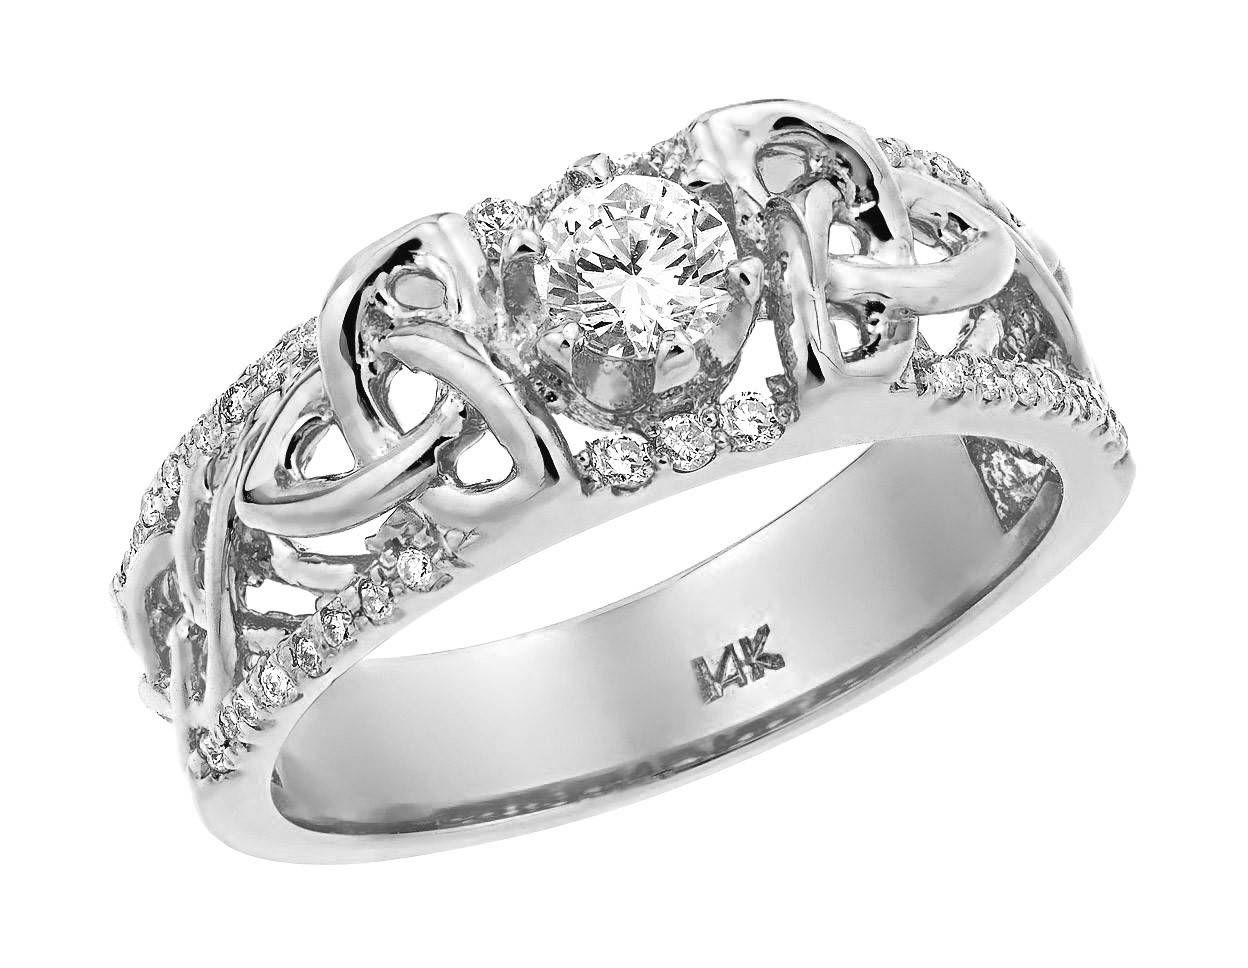 Amazing Celtic Engagement Rings With Irish Engagement Rings Irish Pertaining To Latest Irish Anniversary Rings (View 14 of 25)